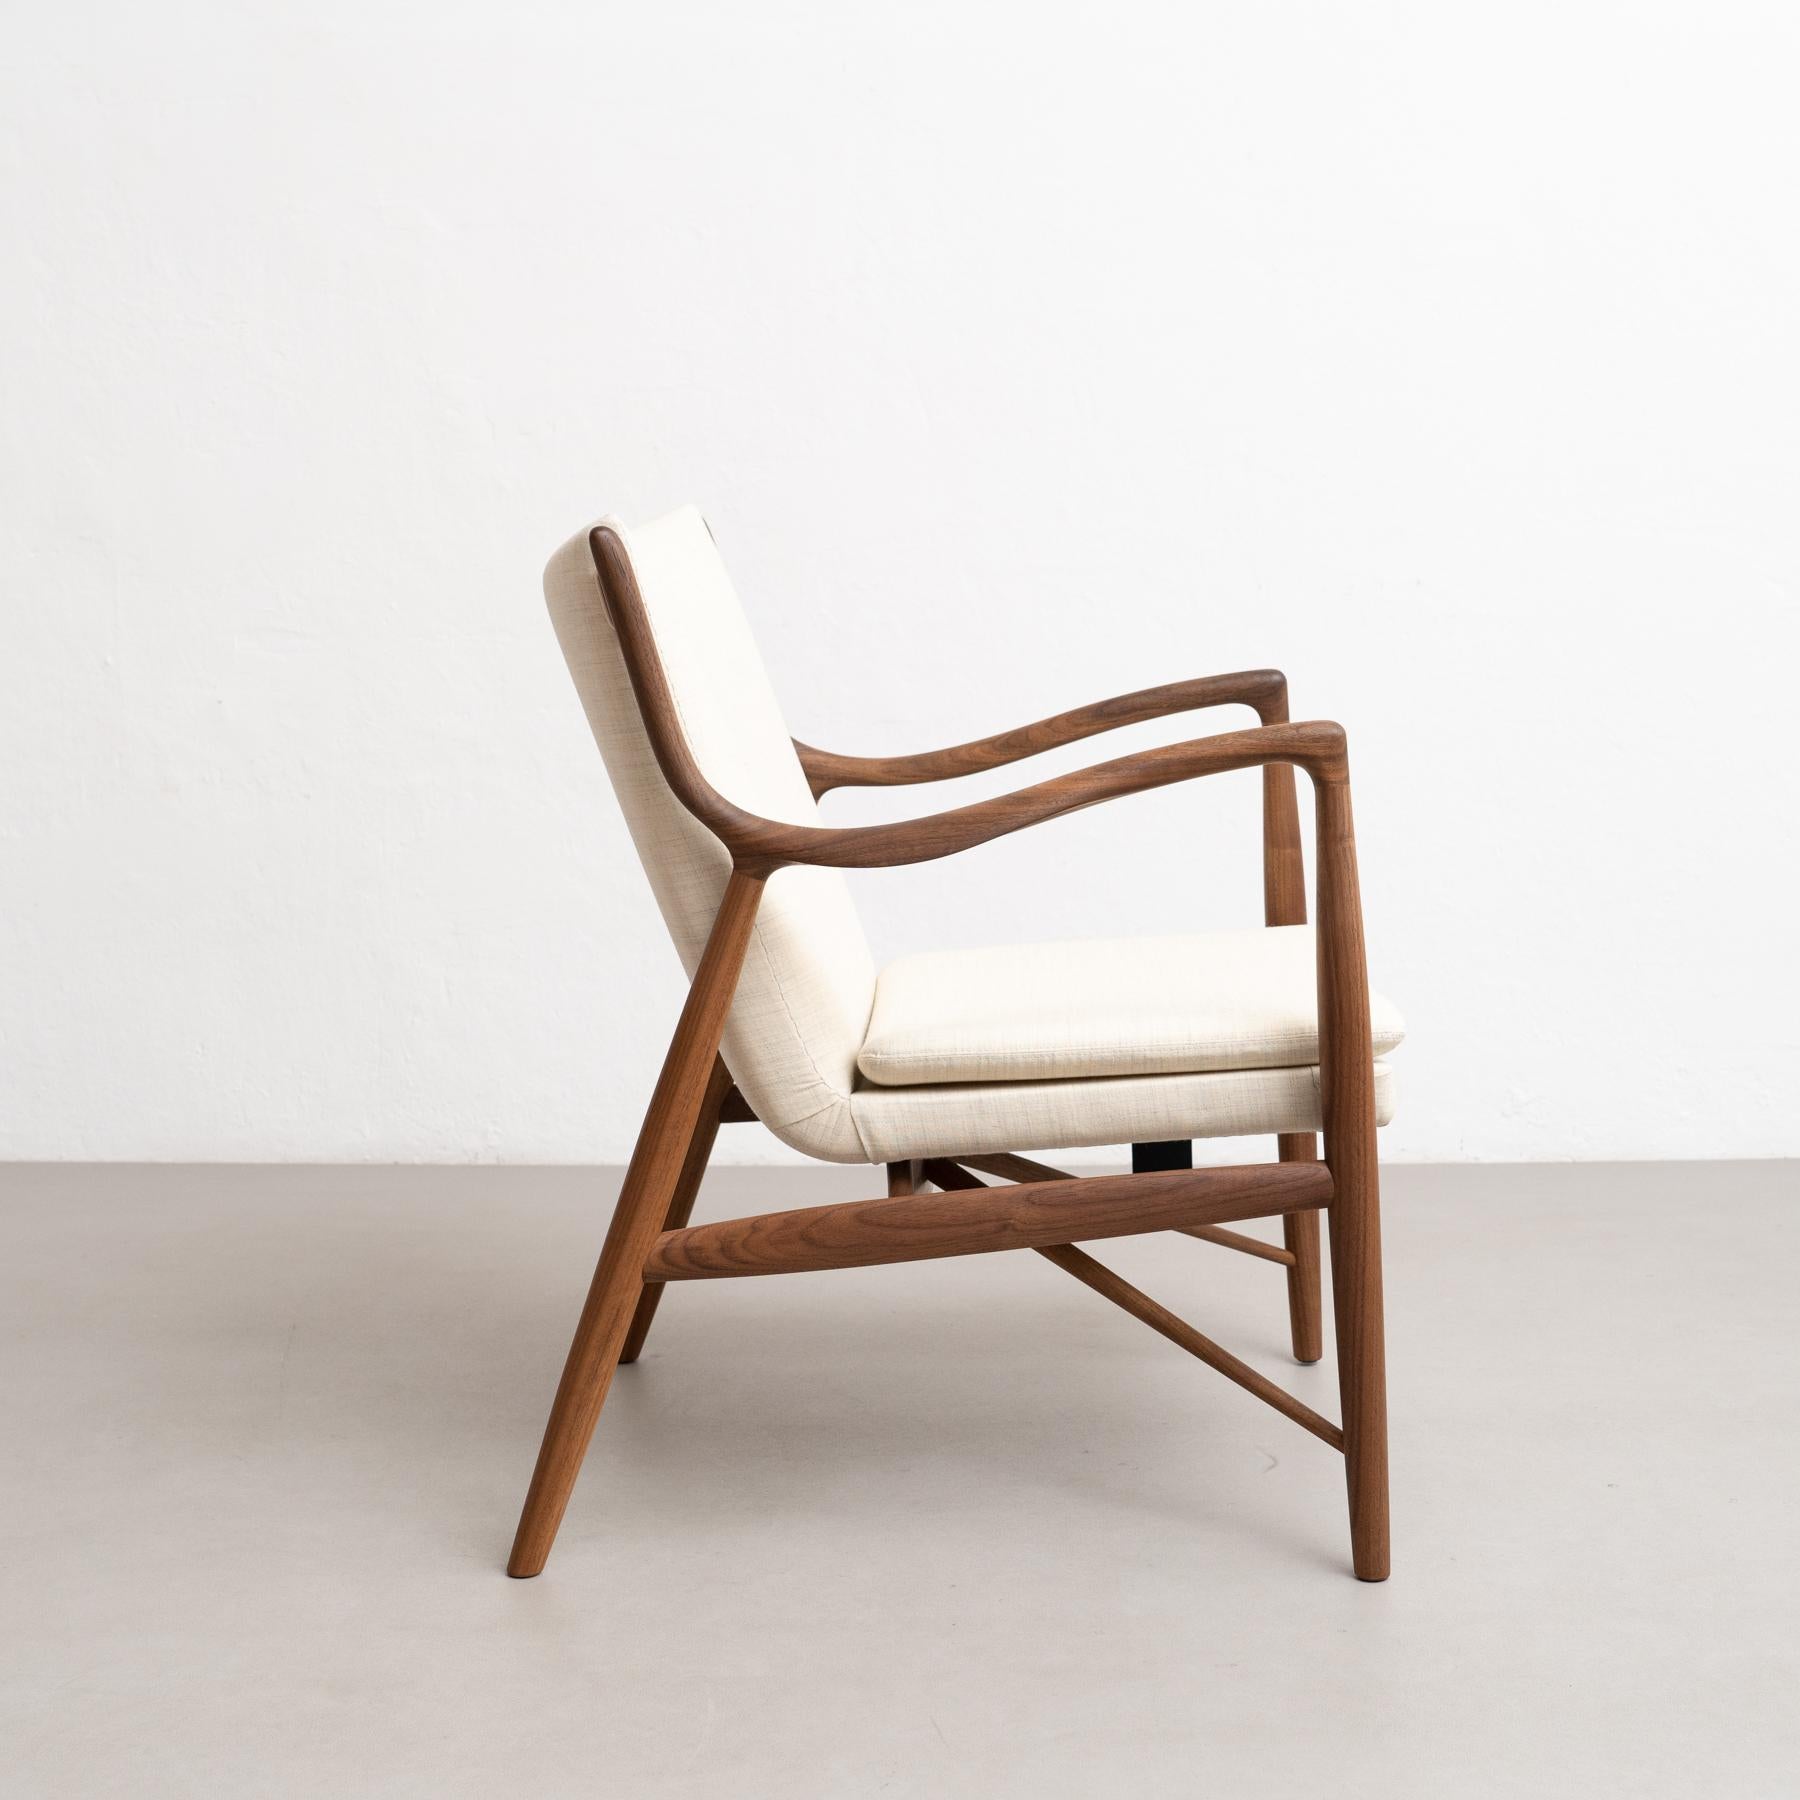 Finn Juhl 45 Chair, Wood and Fabric In New Condition For Sale In Barcelona, Barcelona